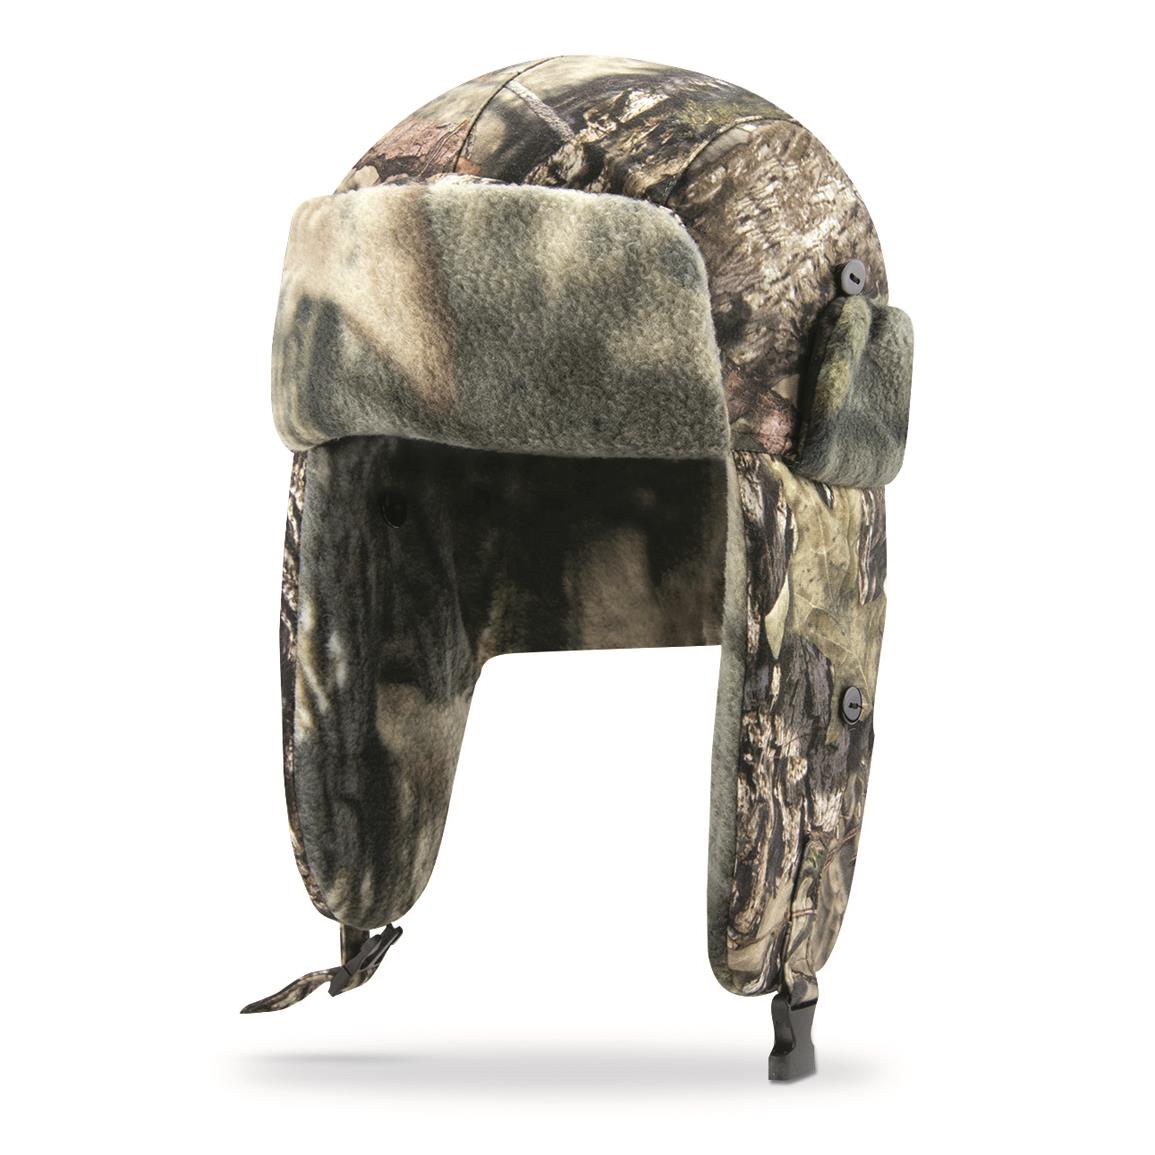 Facemask can be easily detached when you don't need full coverage, Mossy Oak Break-Up® COUNTRY™